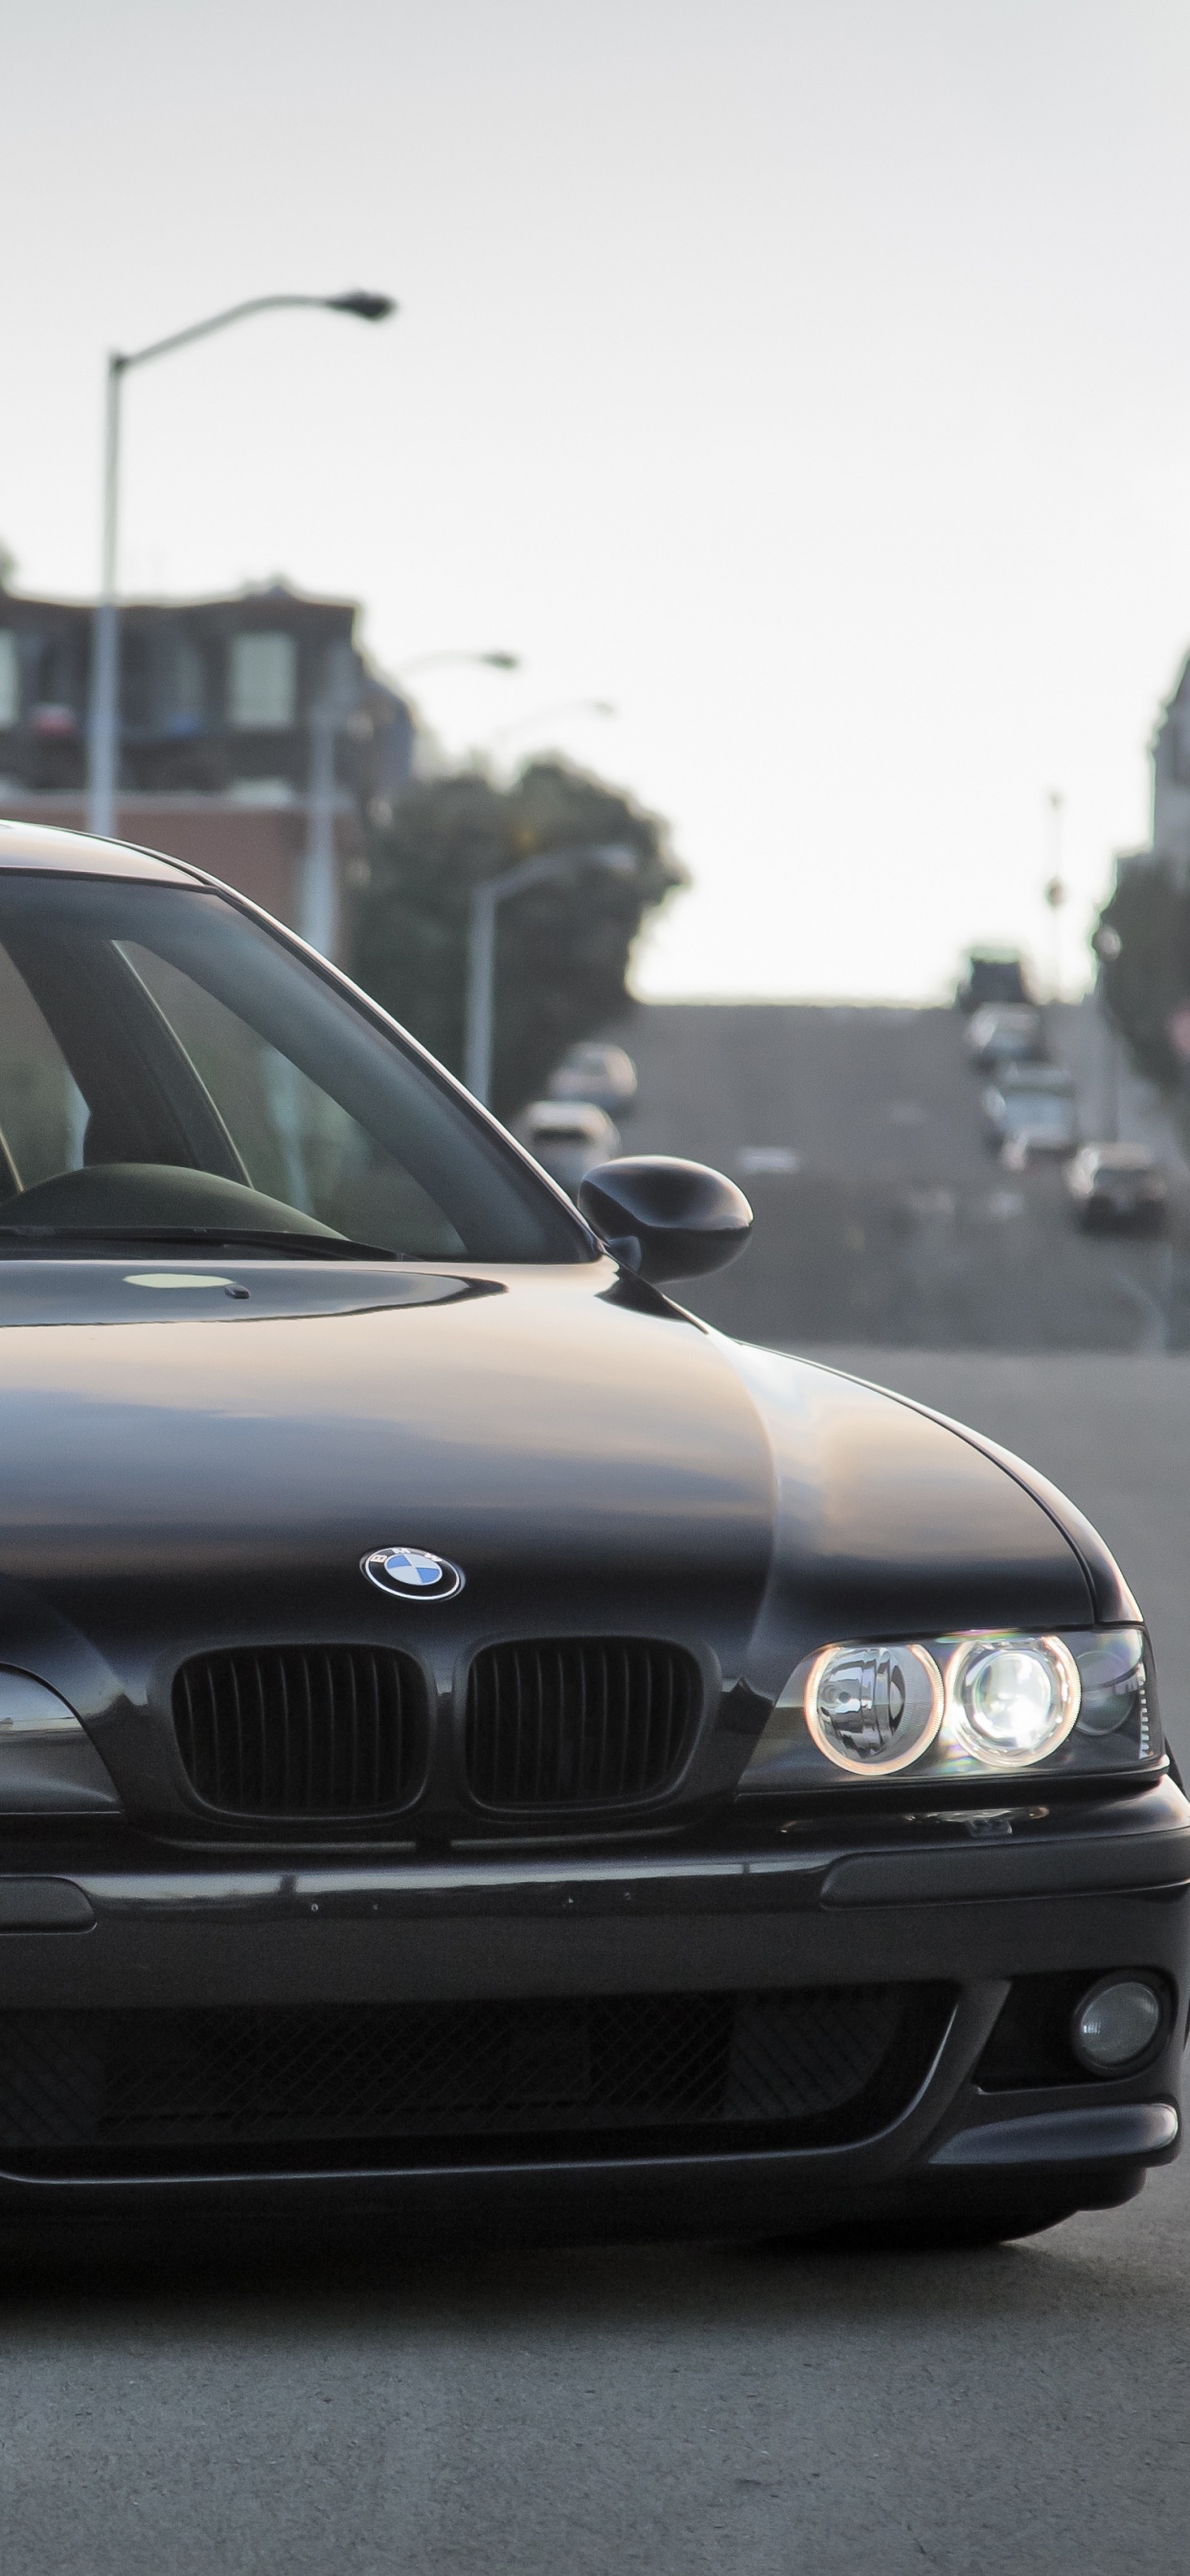 Black Bmw m 3 on Road During Daytime. Wallpaper in 1242x2688 Resolution